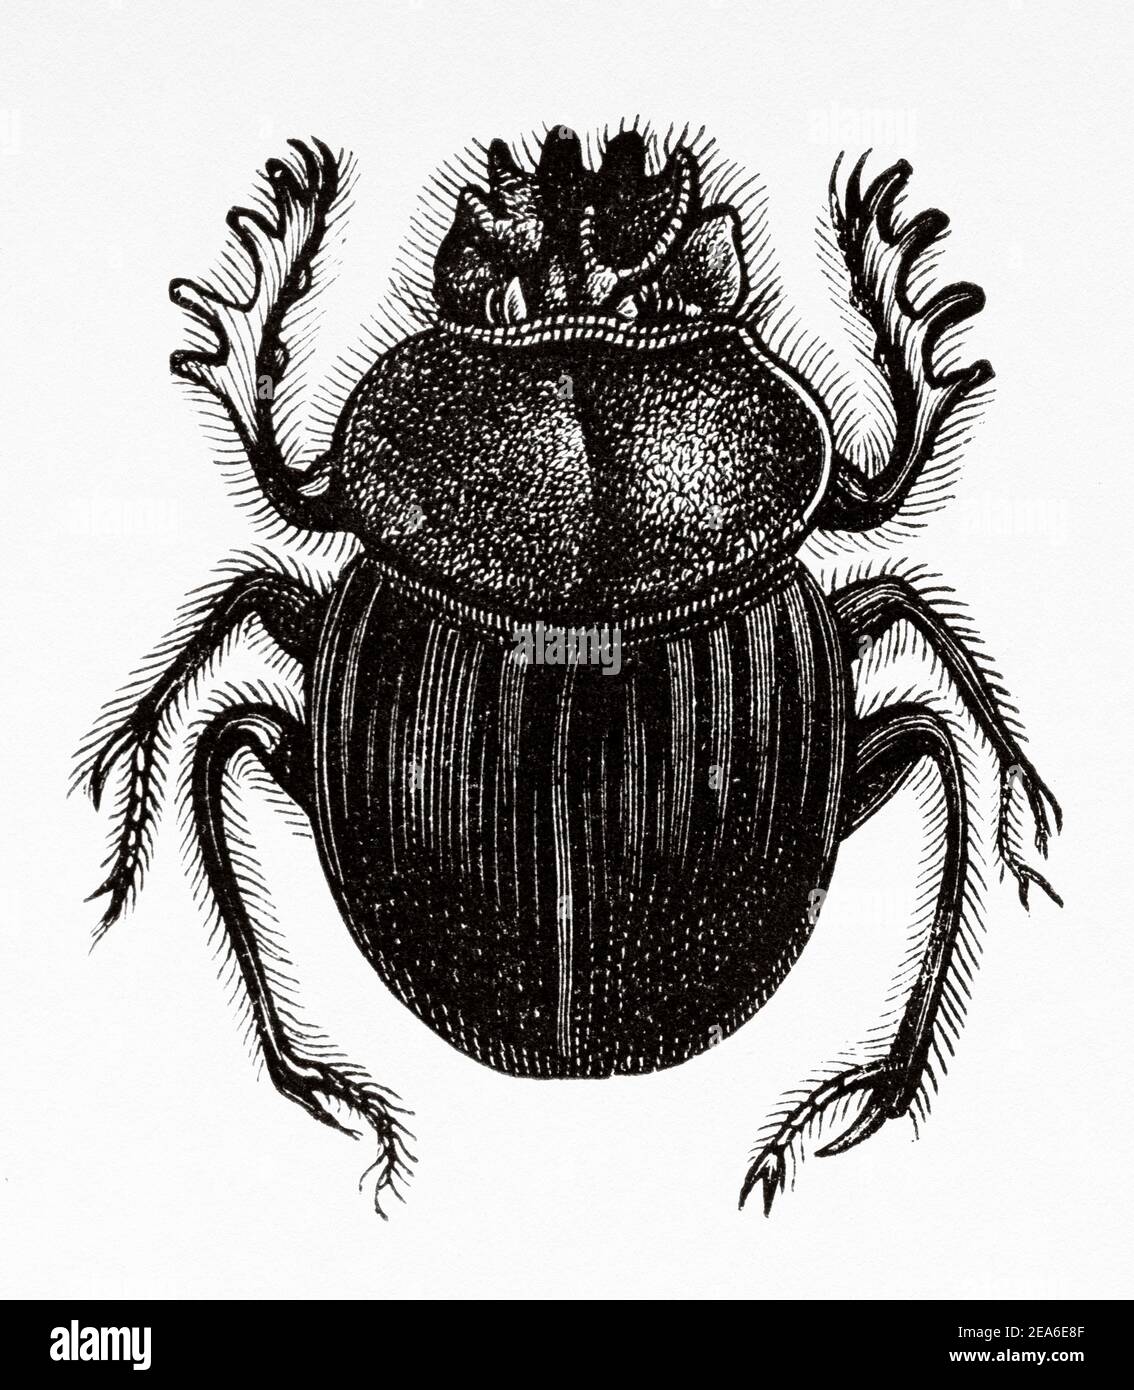 The sacred beetle (Scarabaeus sacerd) is a species of coleopteran insect of the Scarabaeidae family that inhabits the coastal dunes and swamps of the Mediterranean basin. Ancient Egypt History. Old 19th century engraved illustration from El Mundo Ilustrado 1879 Stock Photo